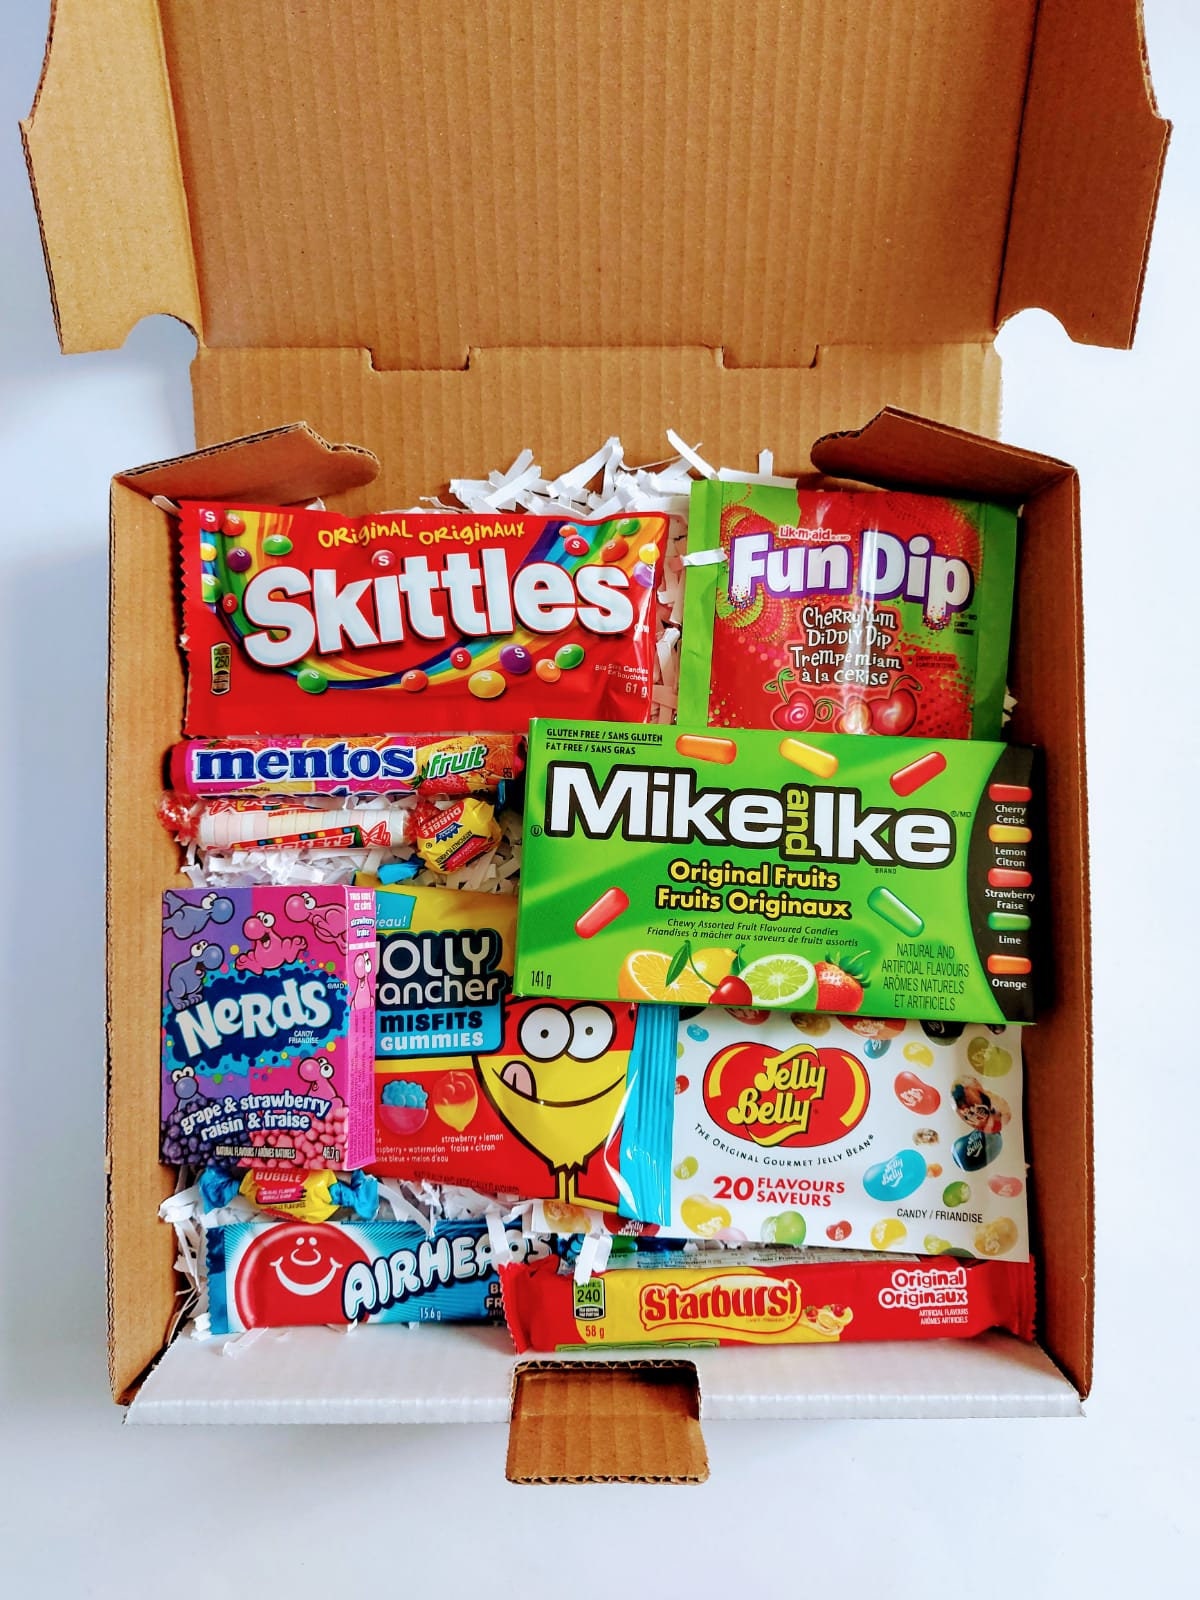 Candy Box, Snack Box, Personalized, Birthday, GIFT, Holidays, FREE SHIPPING  